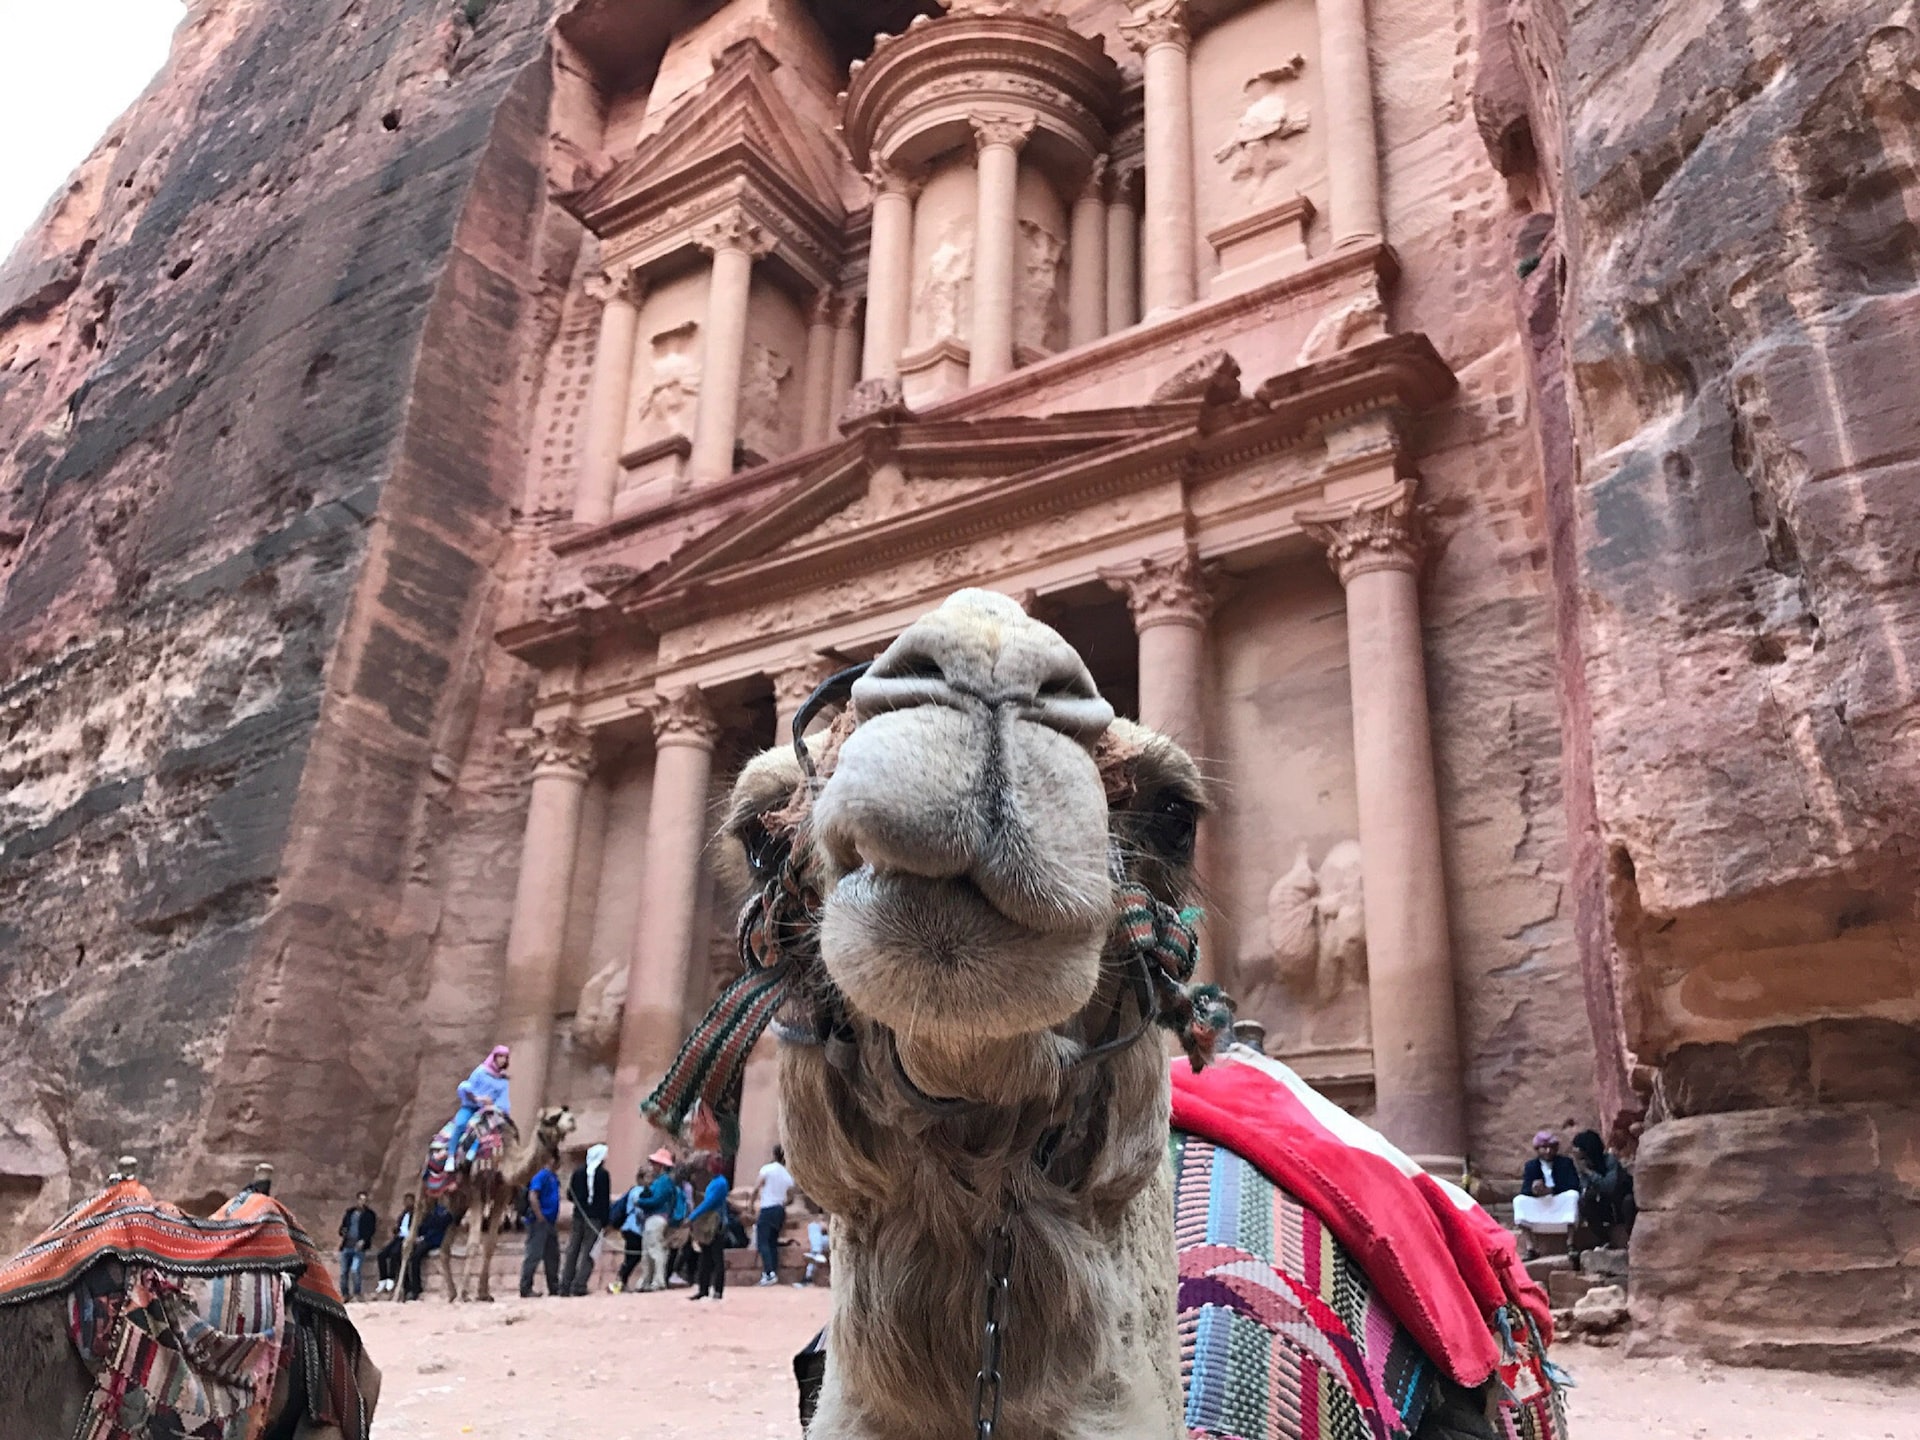 Camel Riding in the Middle East- A Jordanian Camel in front of the famous Petra Treasury